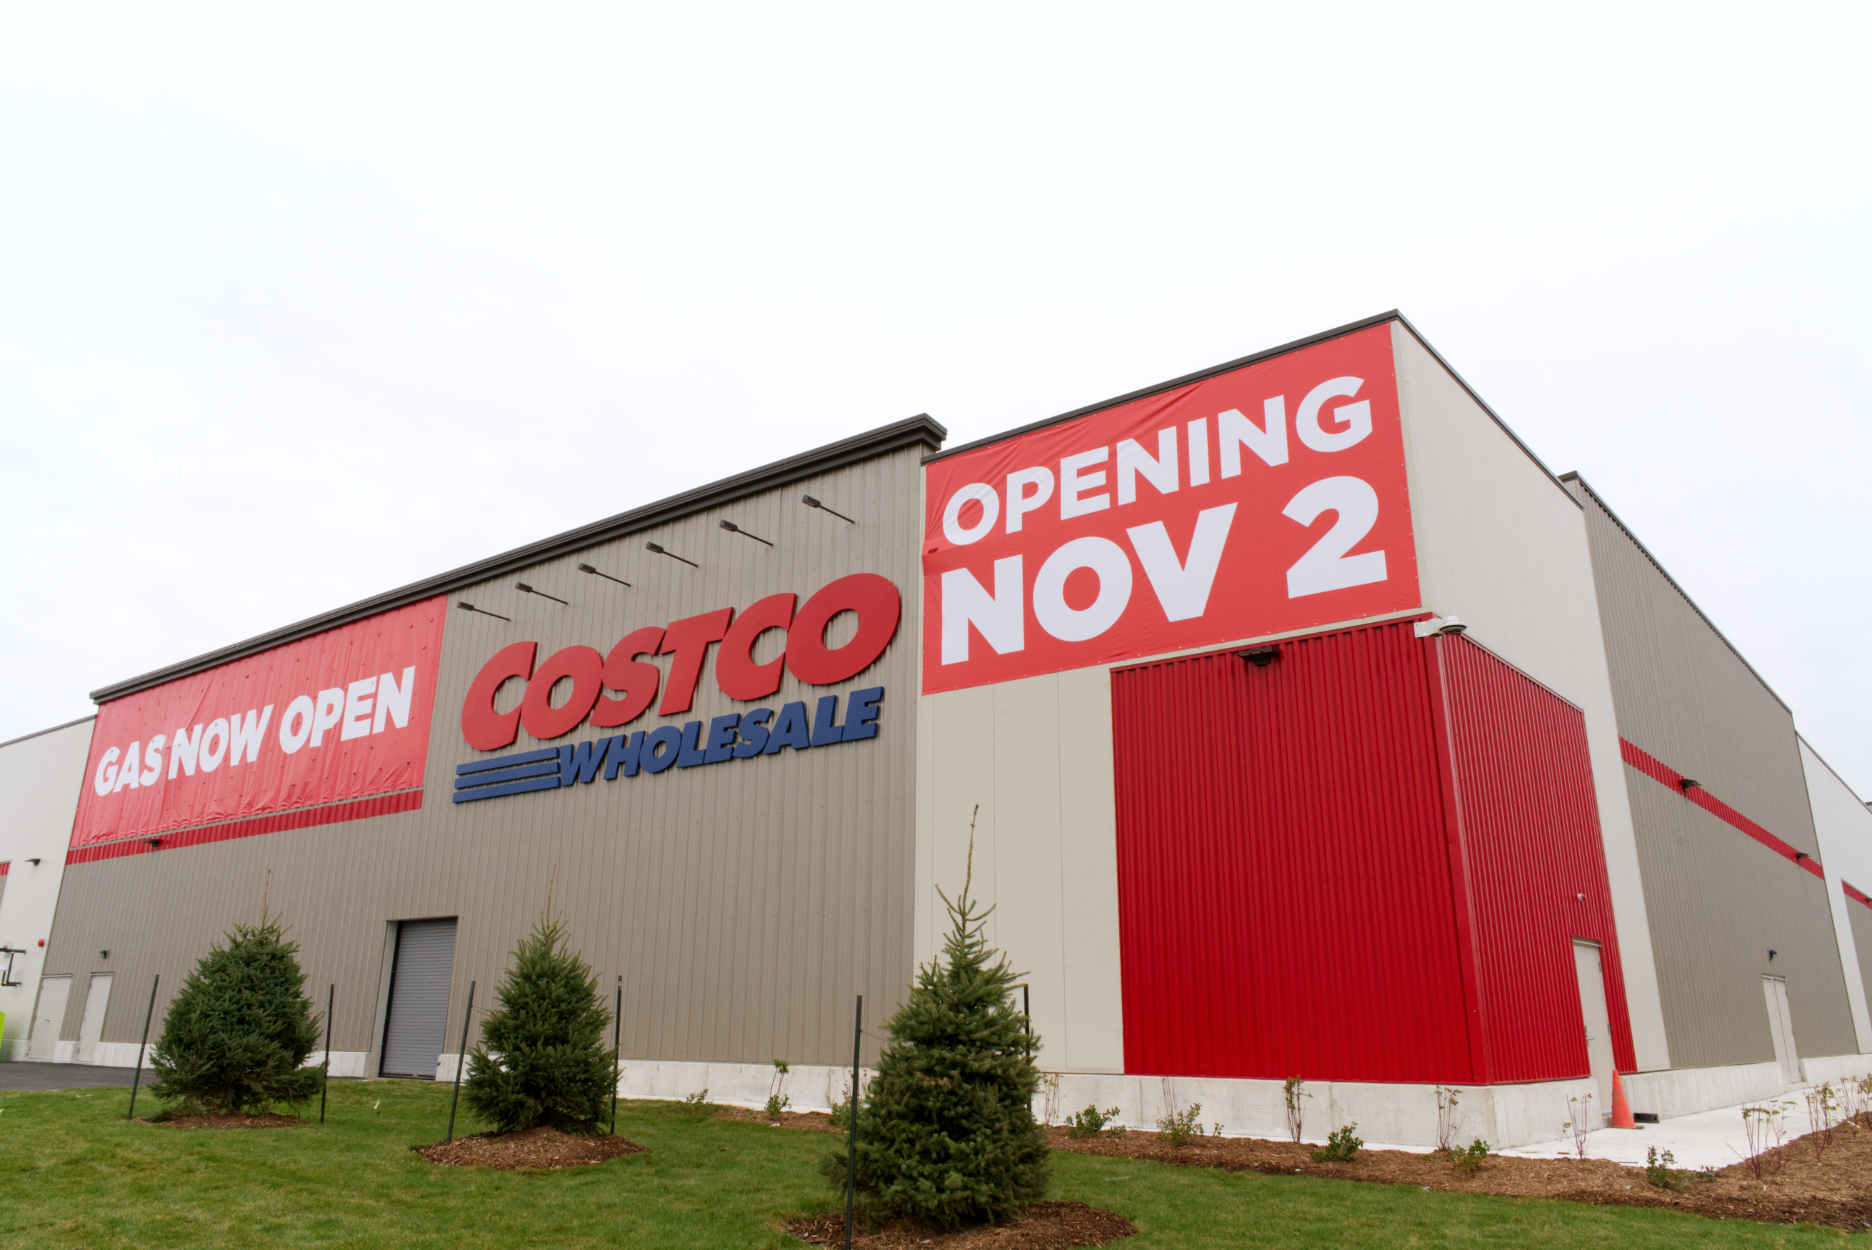 All of the new Costco Canada rules and changes - there's a lot of